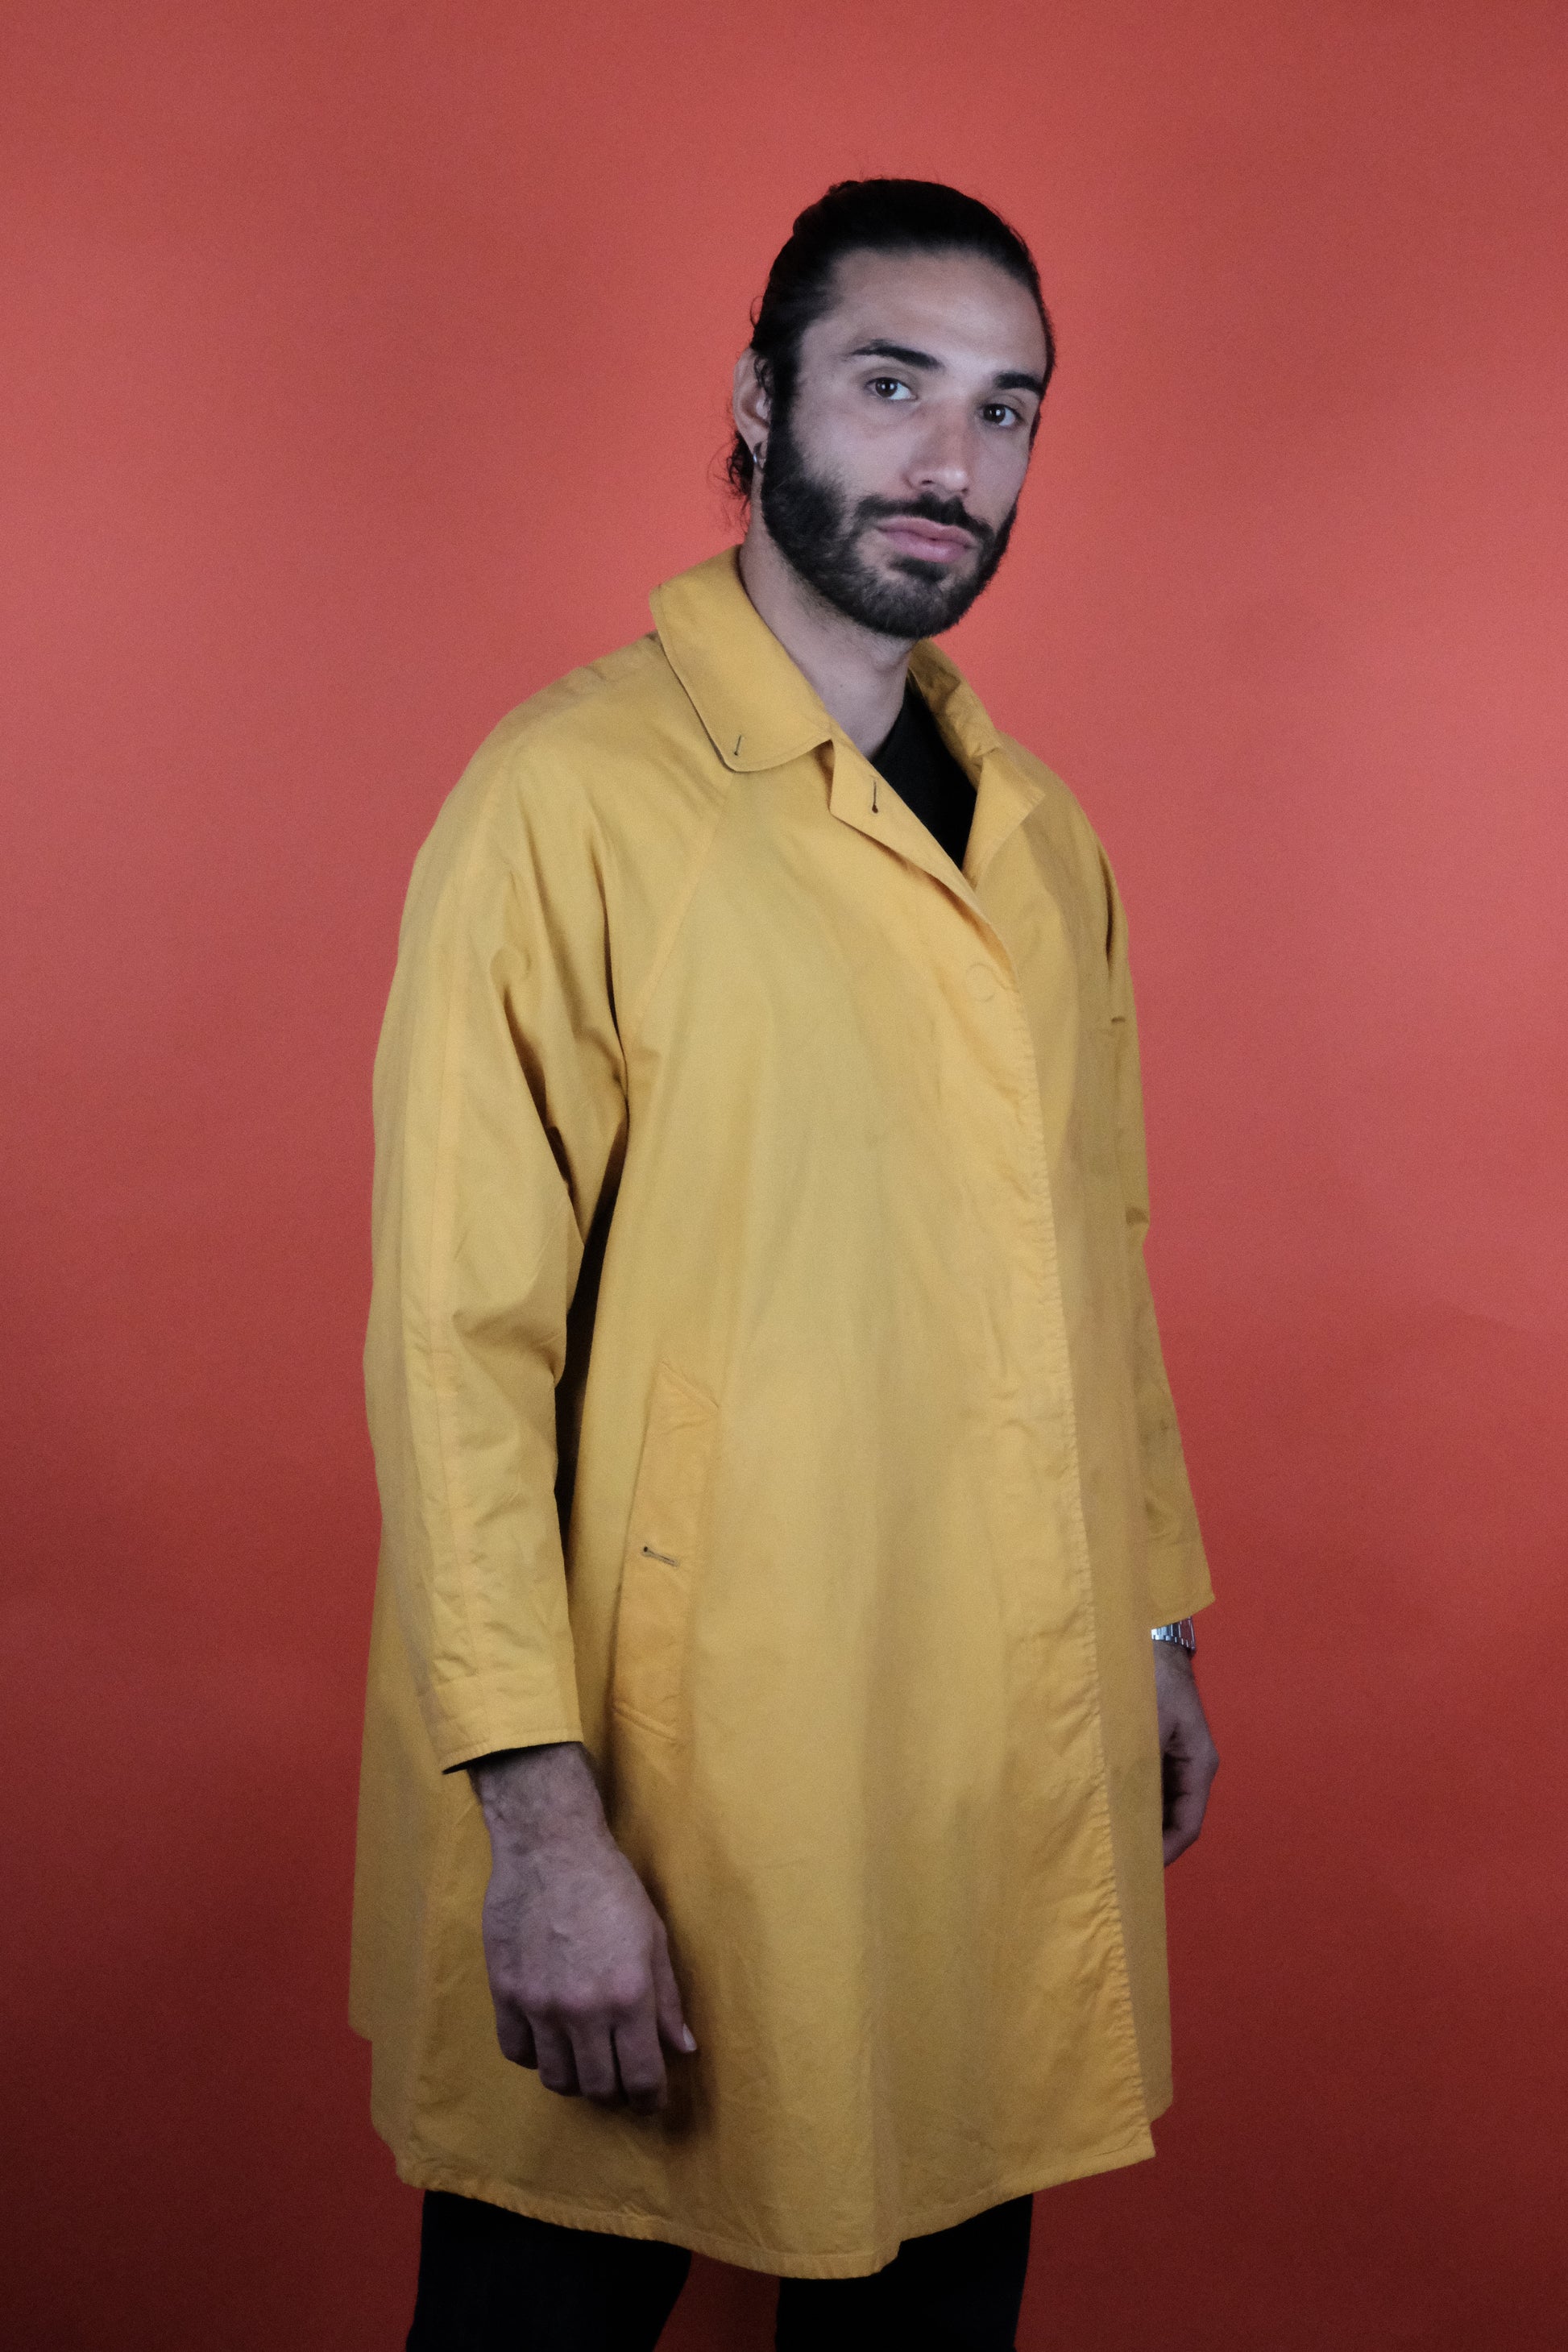 Burberrys' Made in England Yellow Cotton Coat 'M' - vintage clothing clochard92.com